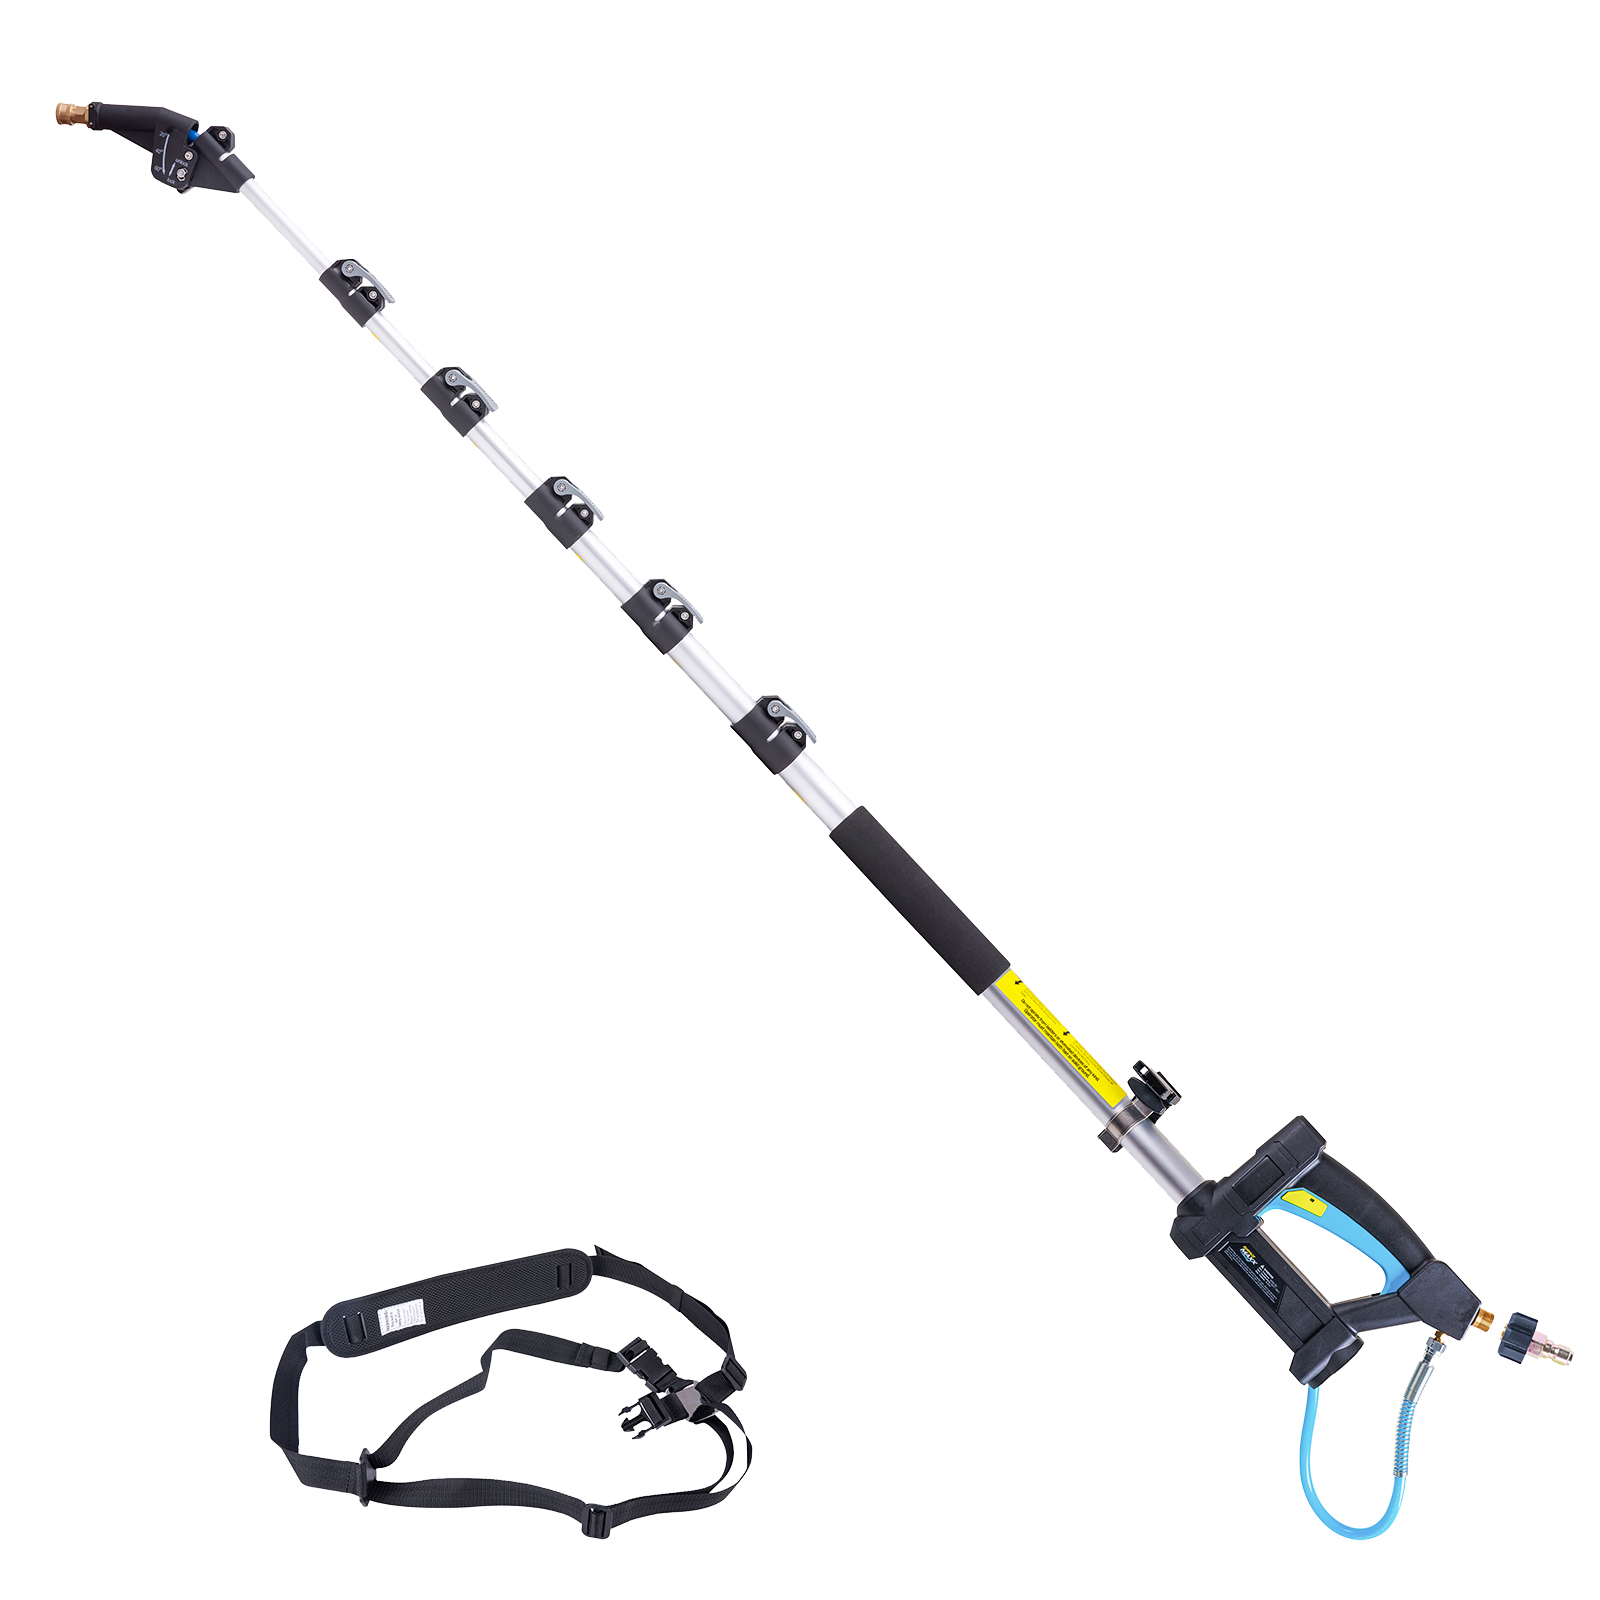 SurfaceMaxx Pro 9-ft Pressure Washer Extension Wand compatible greenworks ryobi 